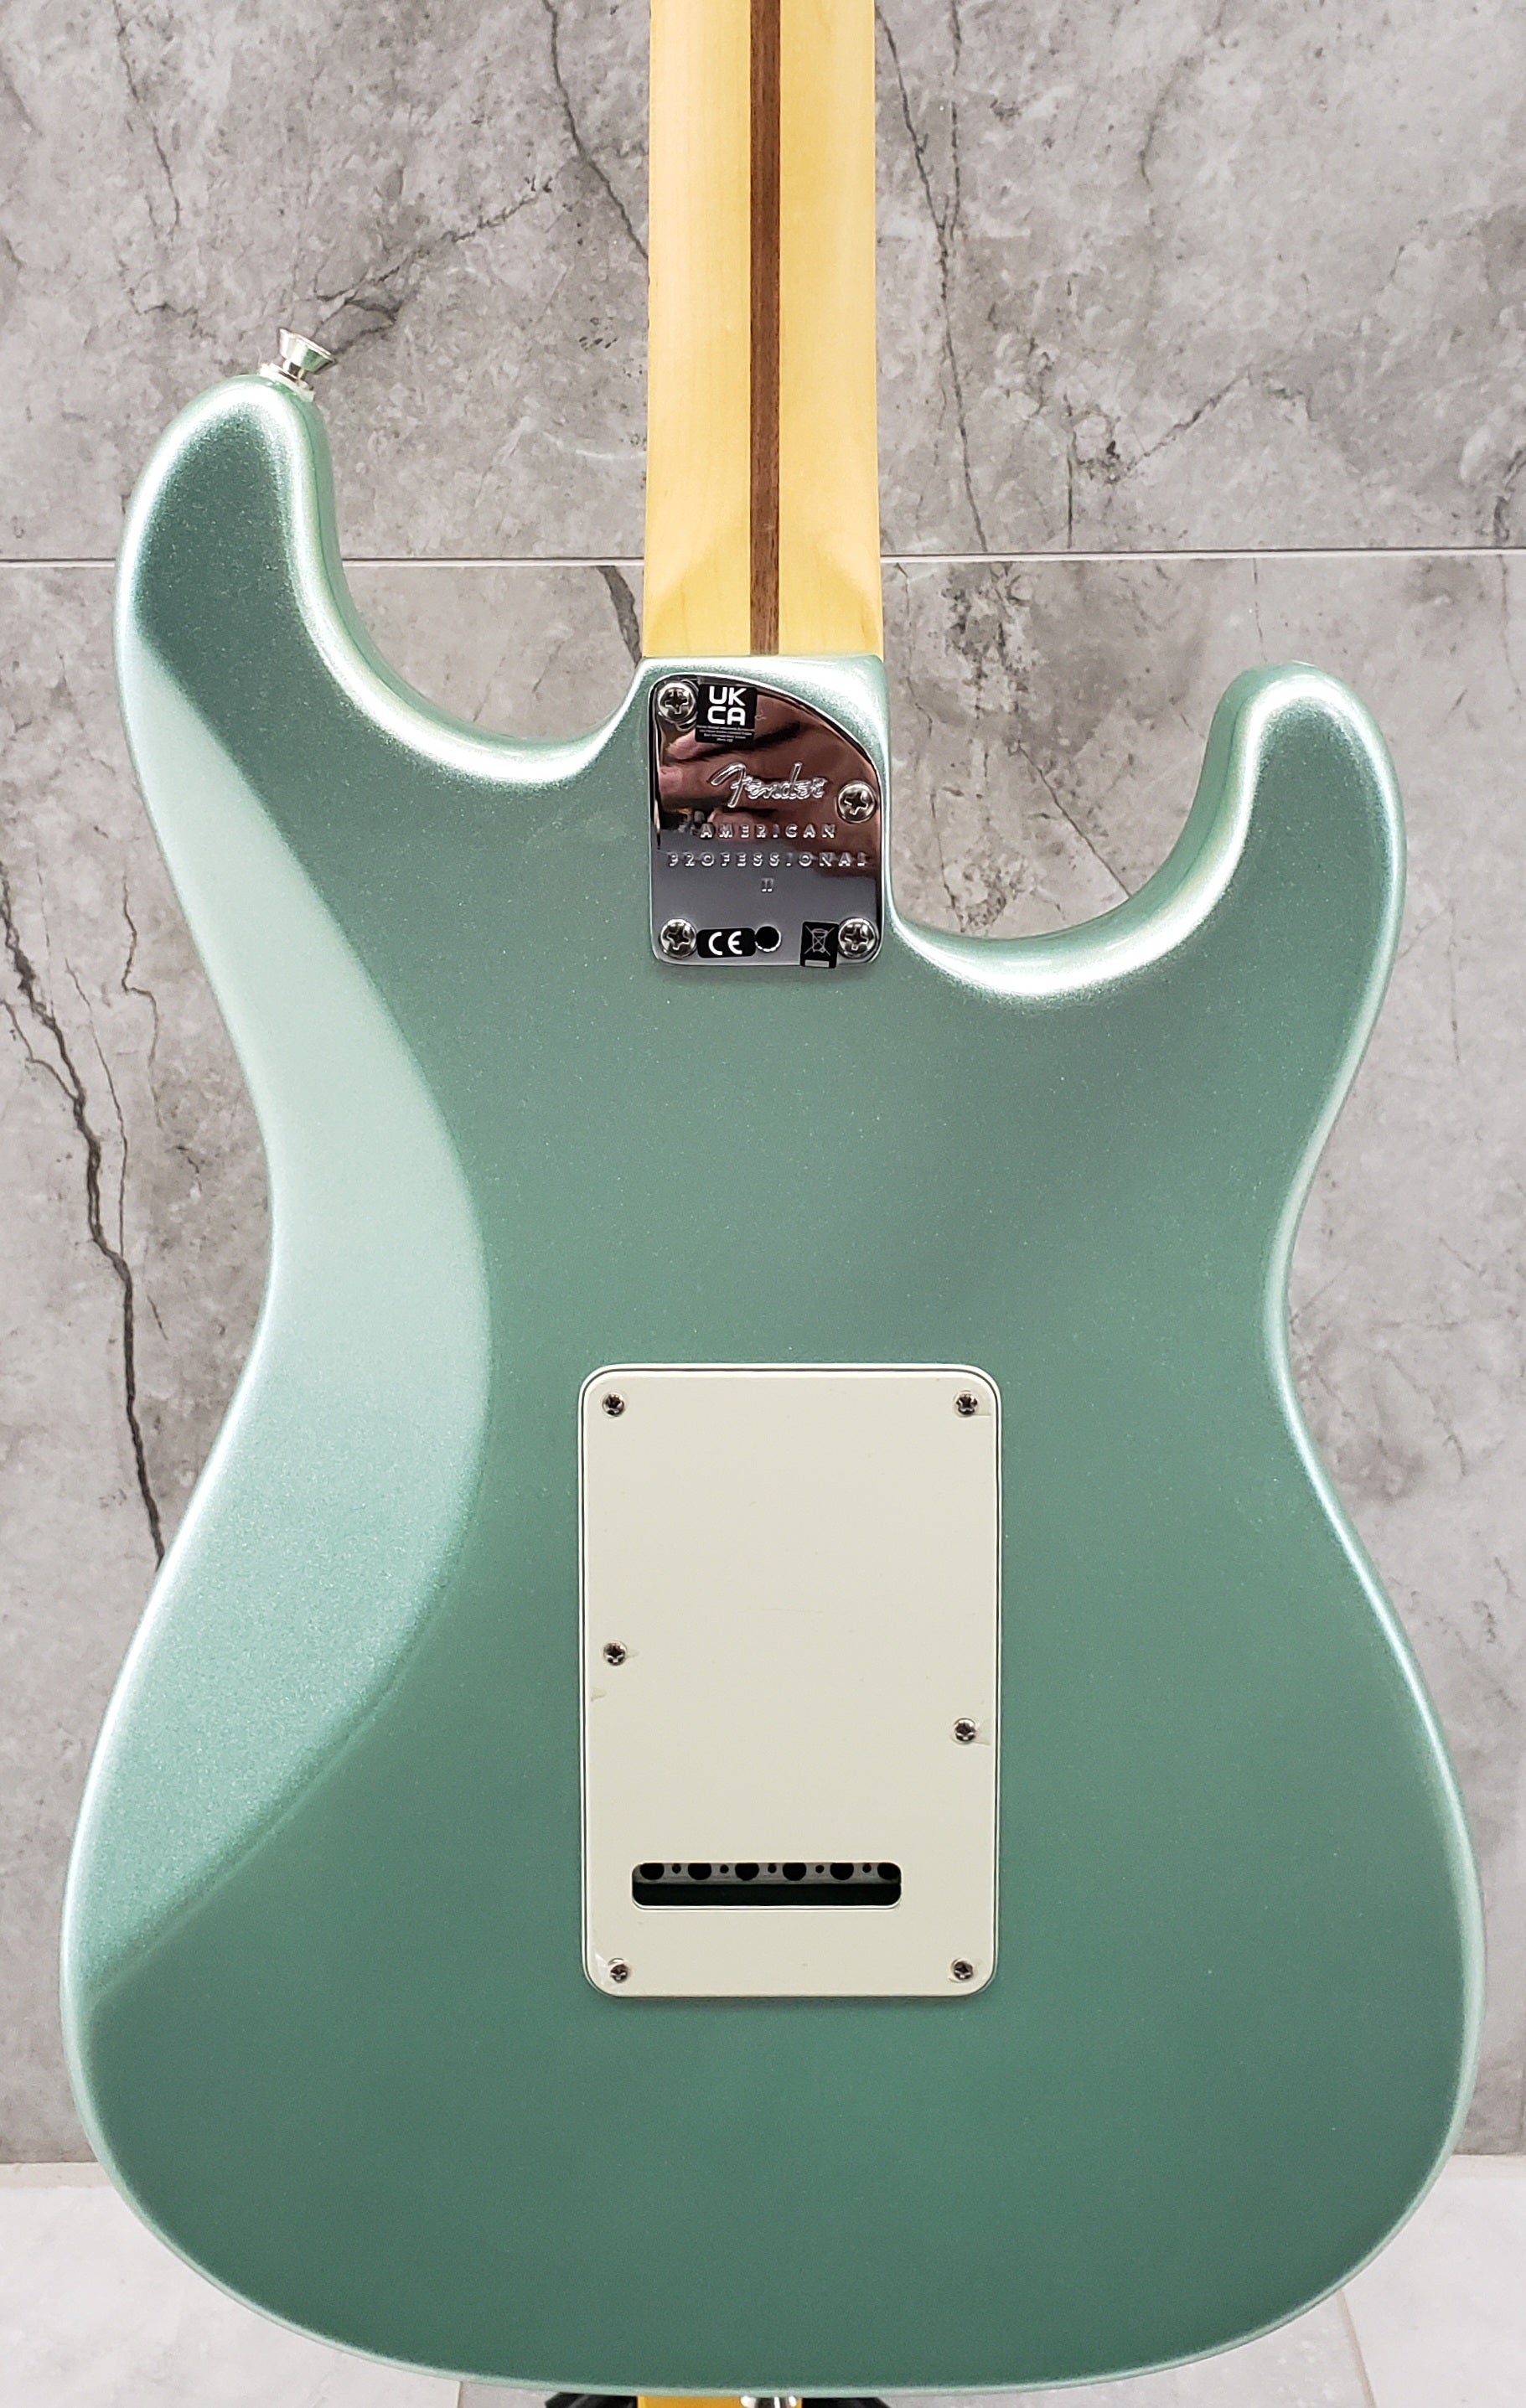 Fender American Professional II Stratocaster Left Hand Maple Fingerboard Mystic Surf Green F-0113932718 SERIAL NUMBER US22001529 - 8.0 LBS